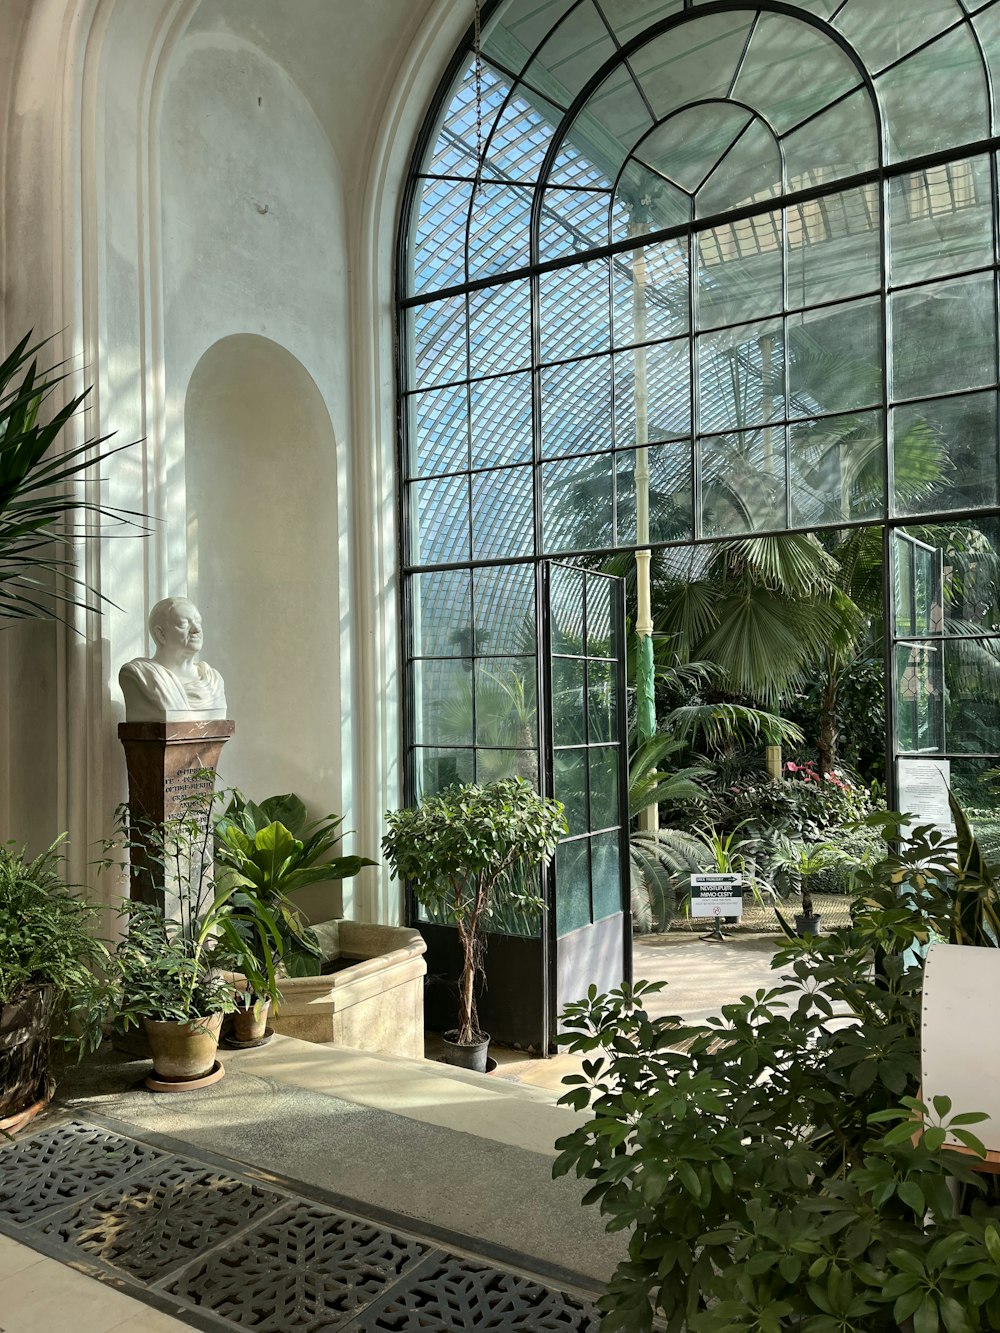 a glass walled building with plants and a statue in the middle